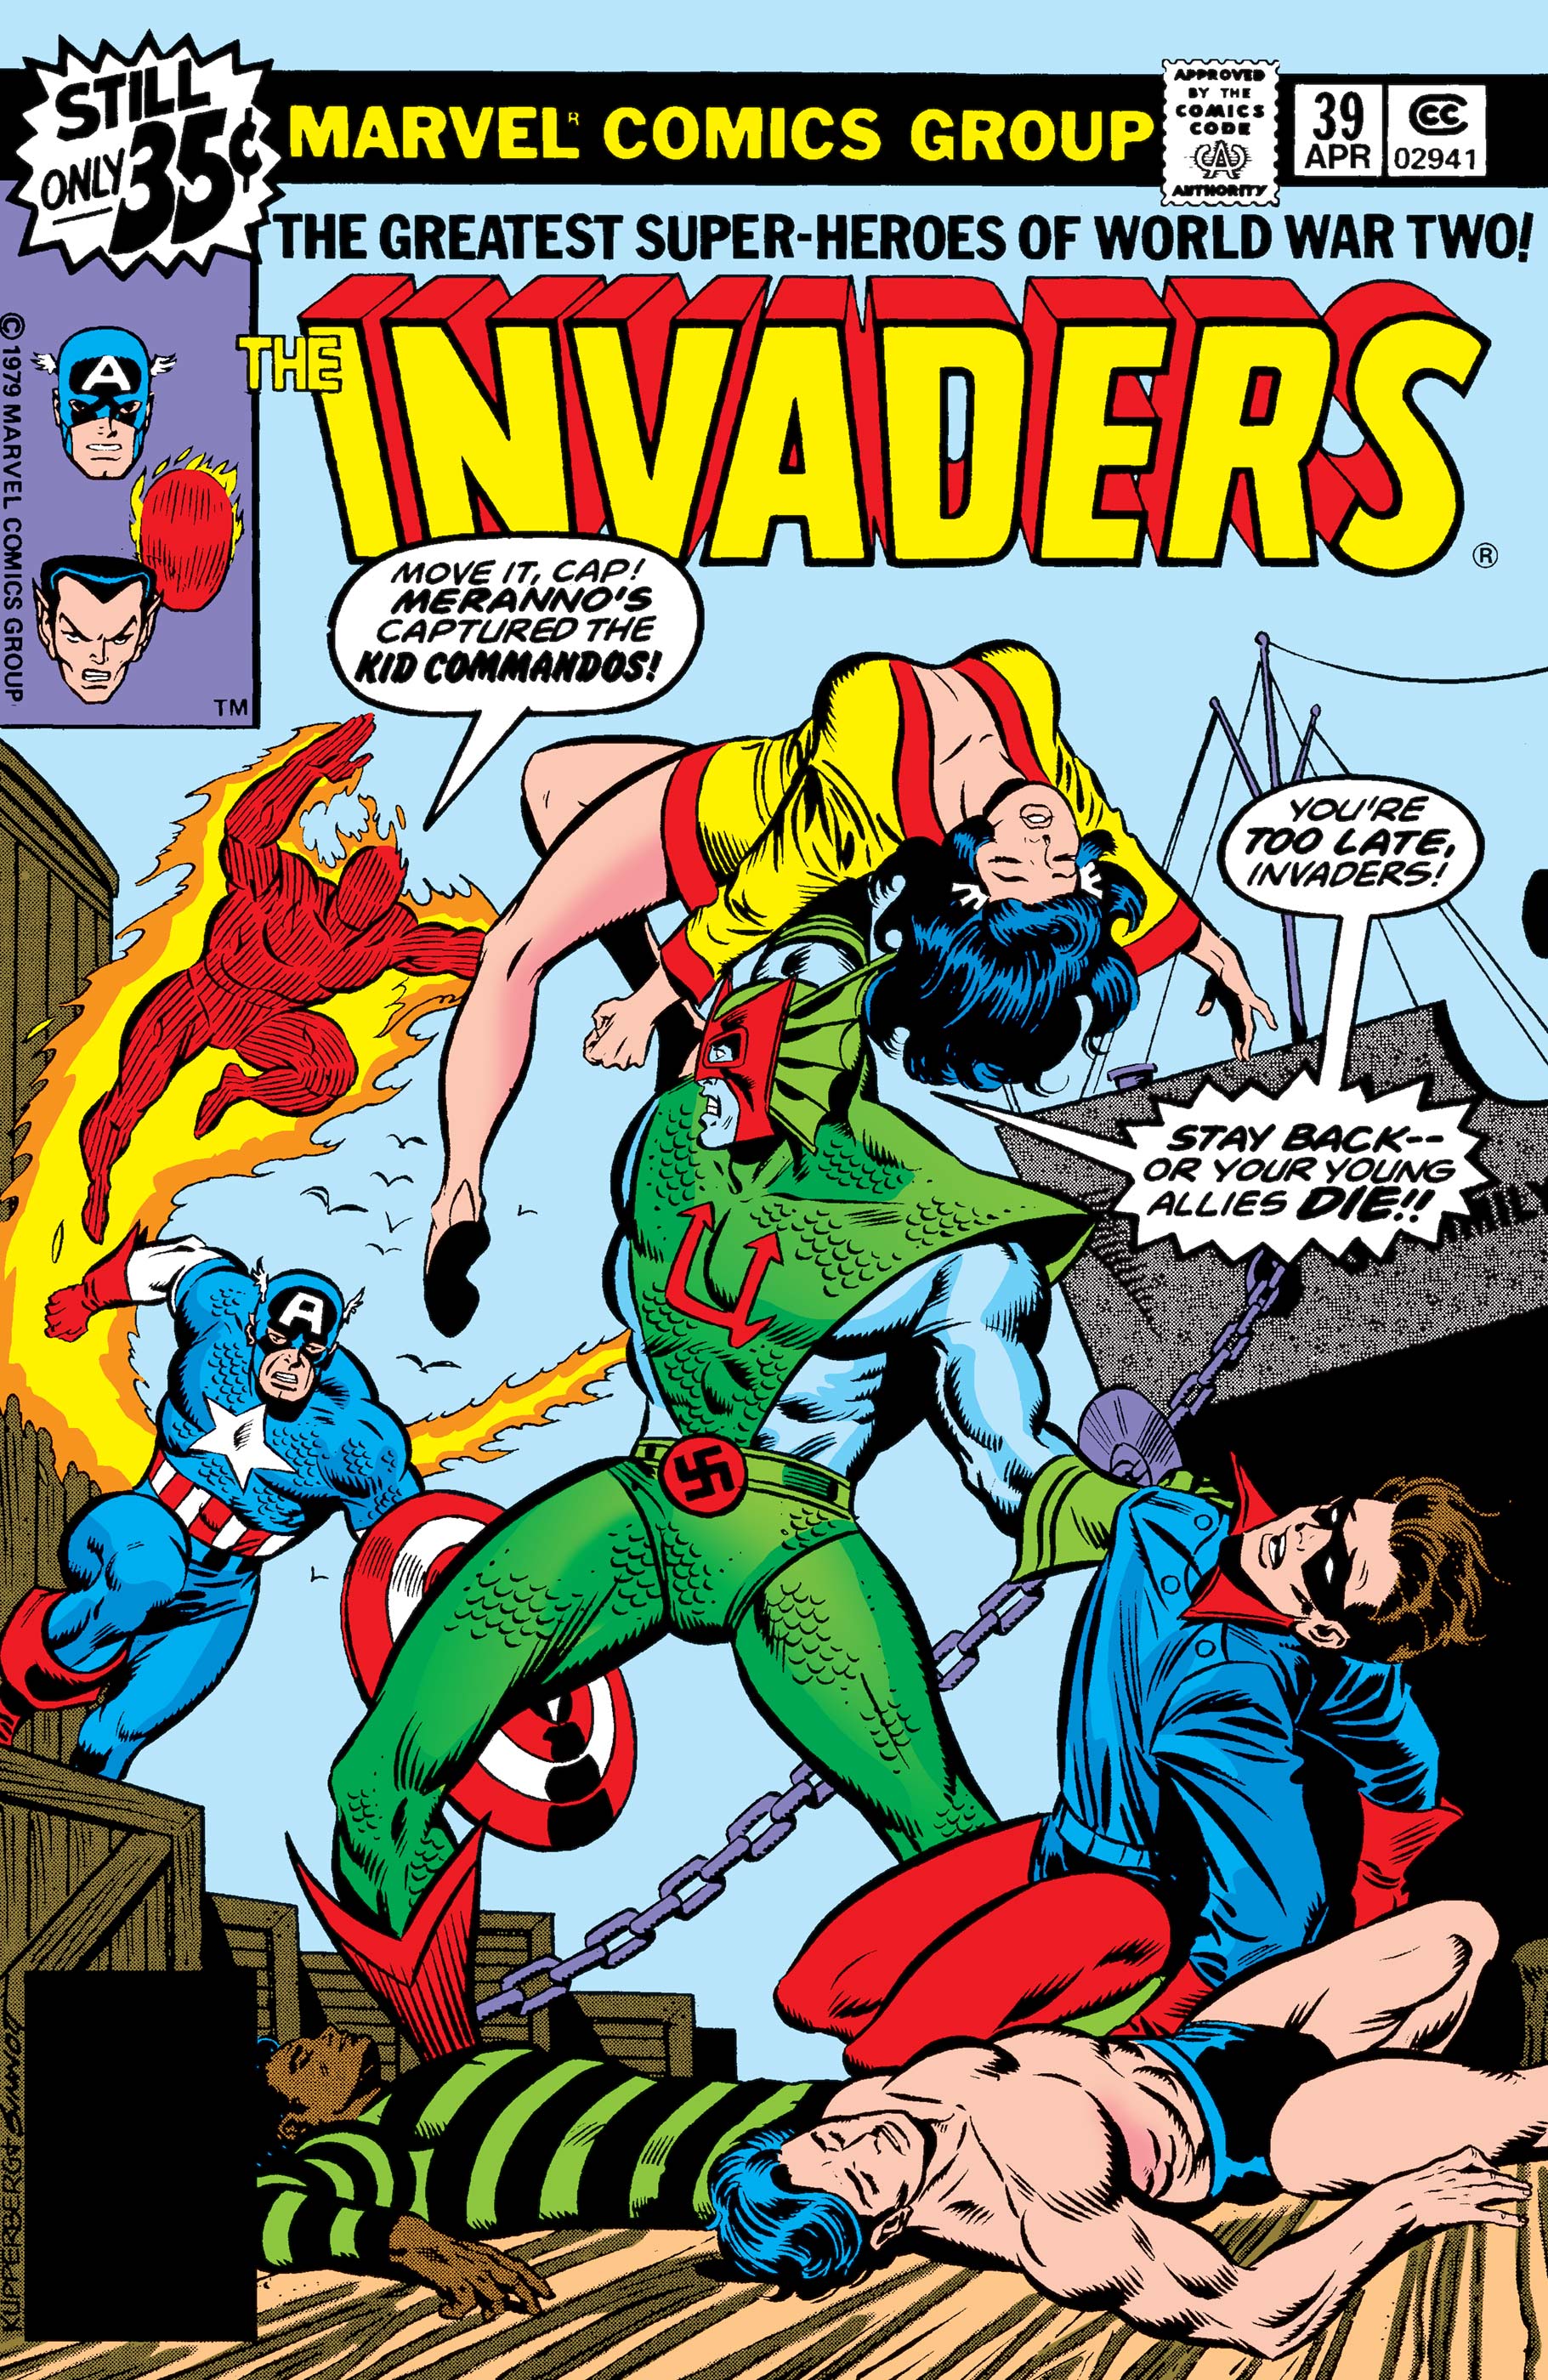 Invaders (1975) #39